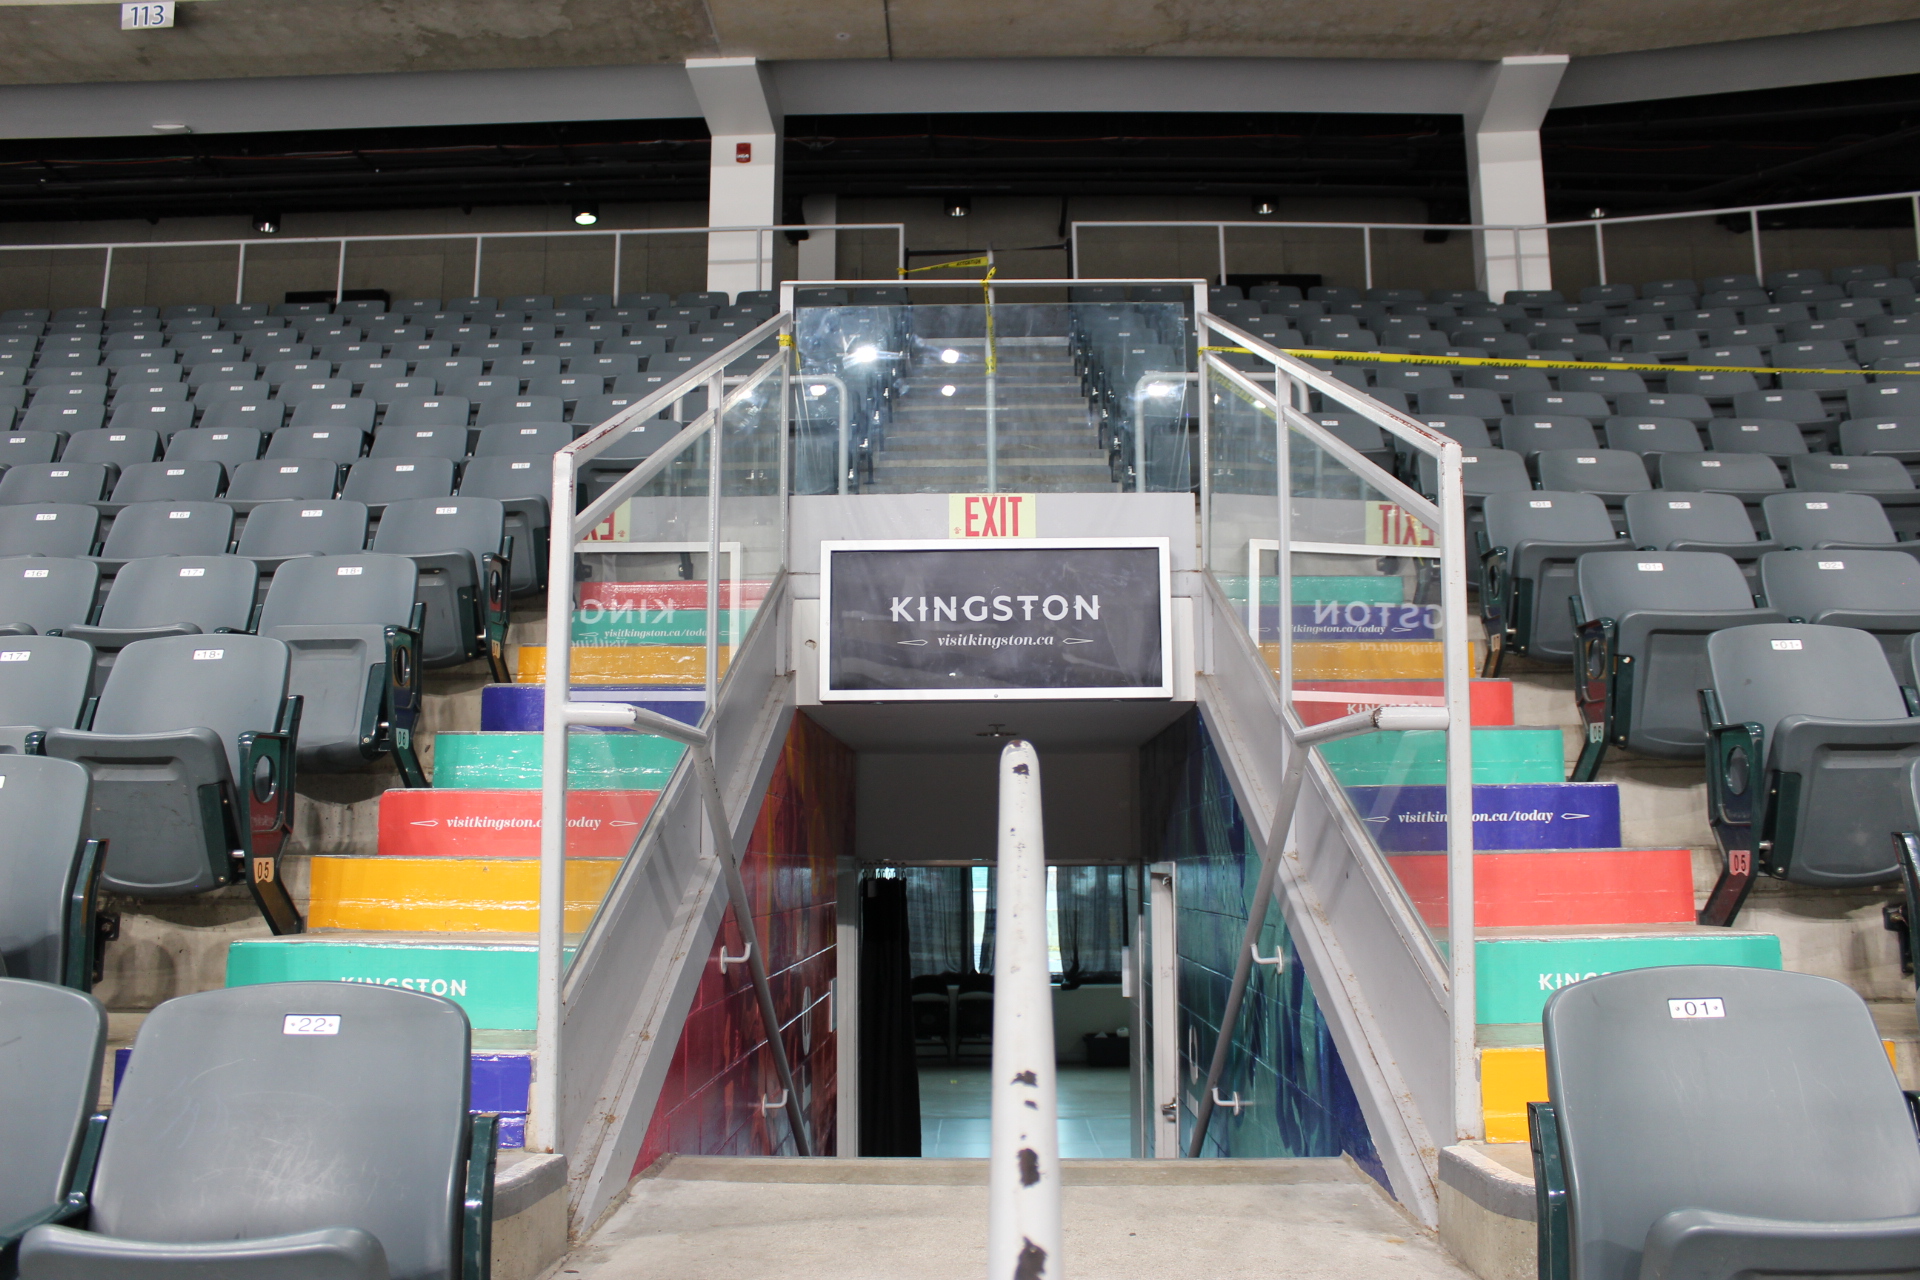 Staircase covered in Advertising Display